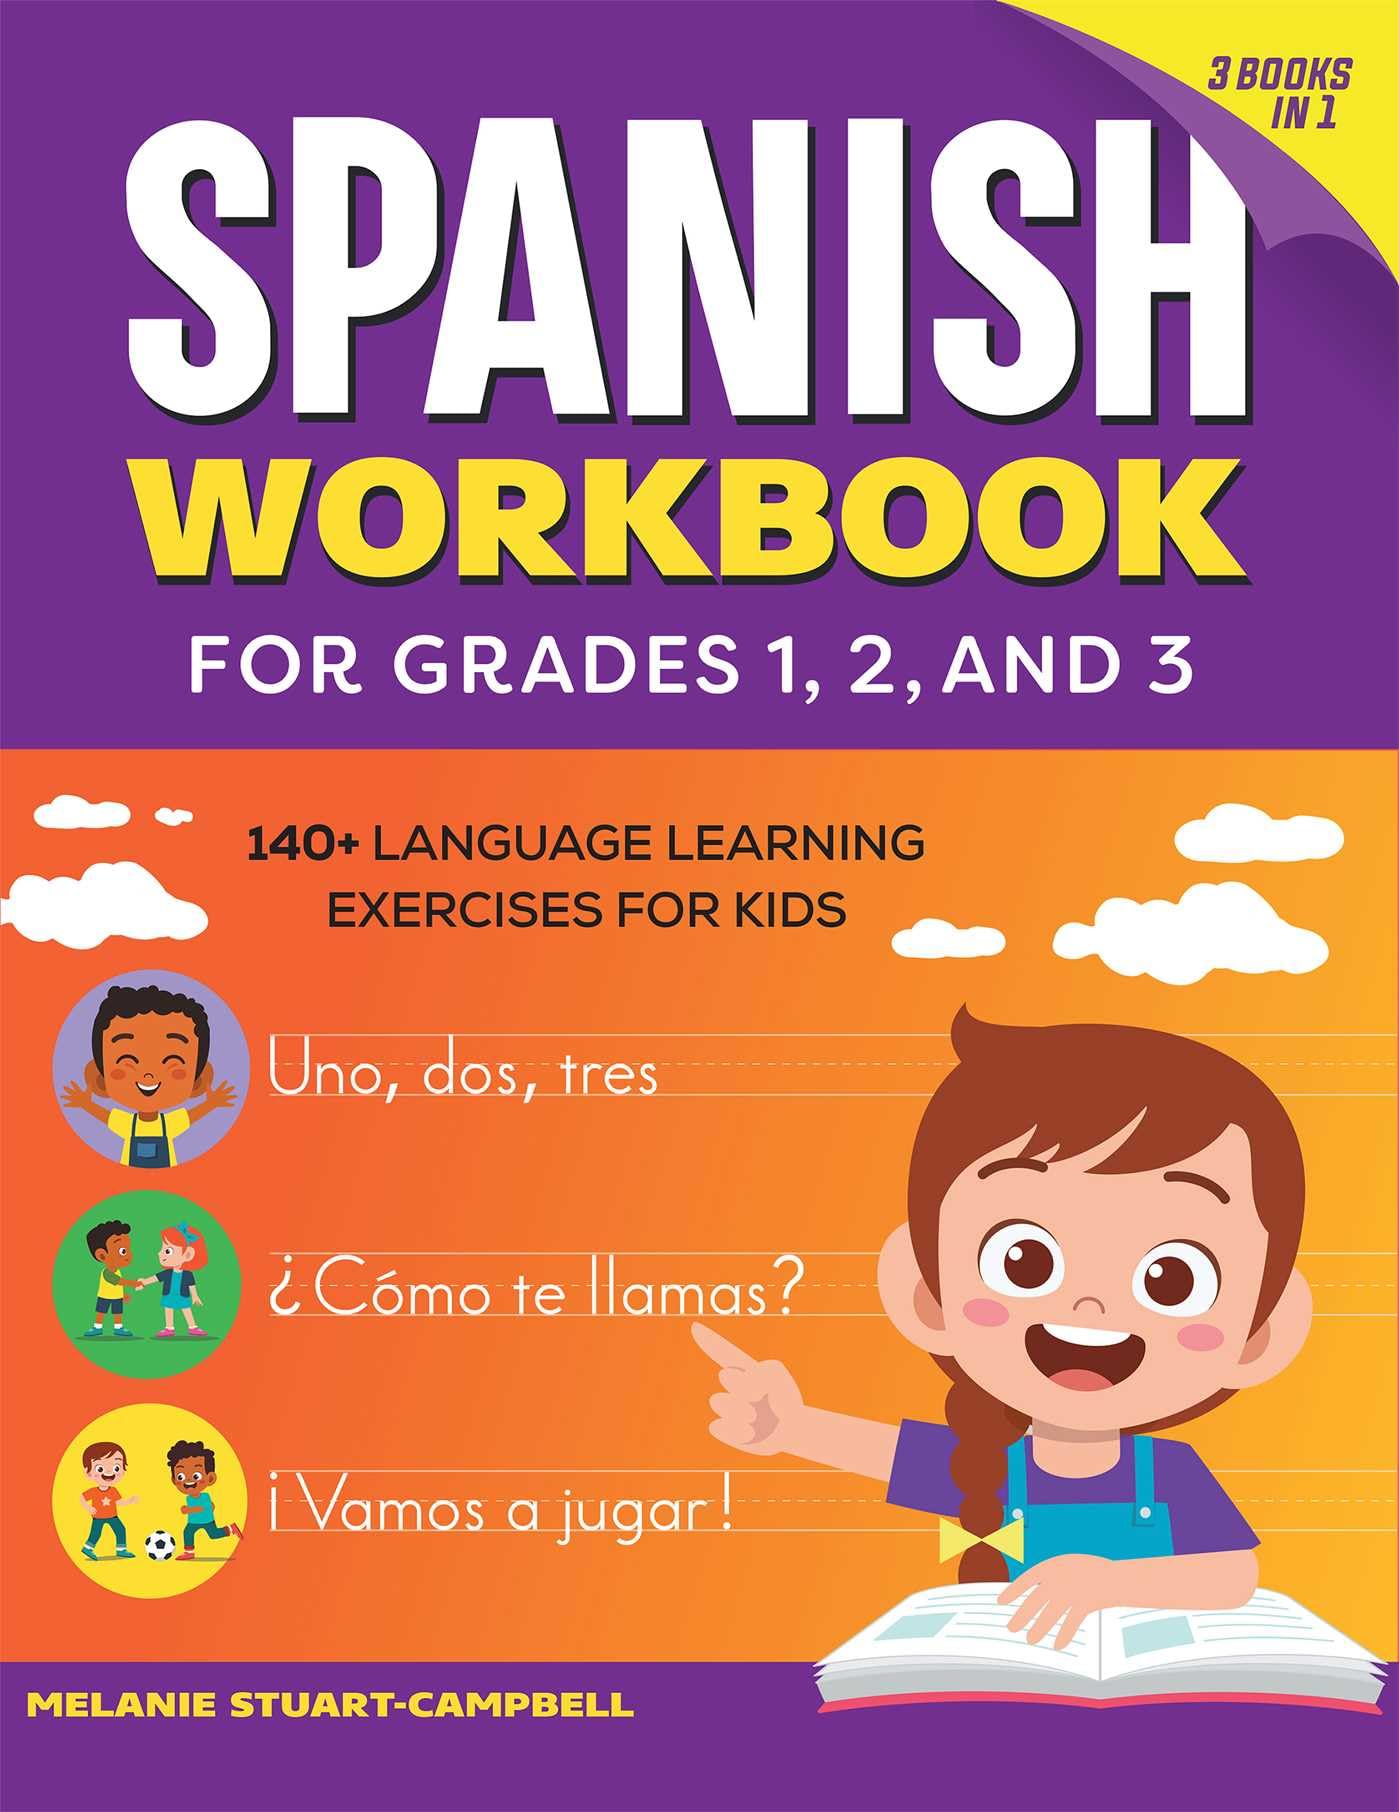 The Spanish Workbook for Grades 1, 2, and 3: 140+ Language Learning Exercises for Kids Ages 6-9 by Stuart-Campbell, Melanie